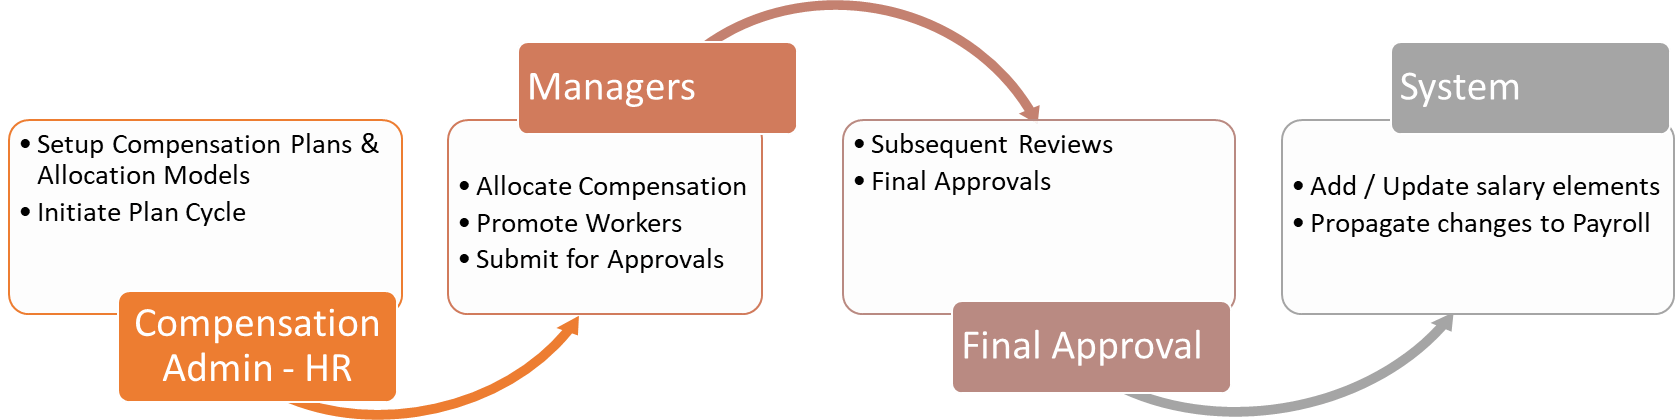 Implementing Compensation Strategy - Compensation Cycle Process